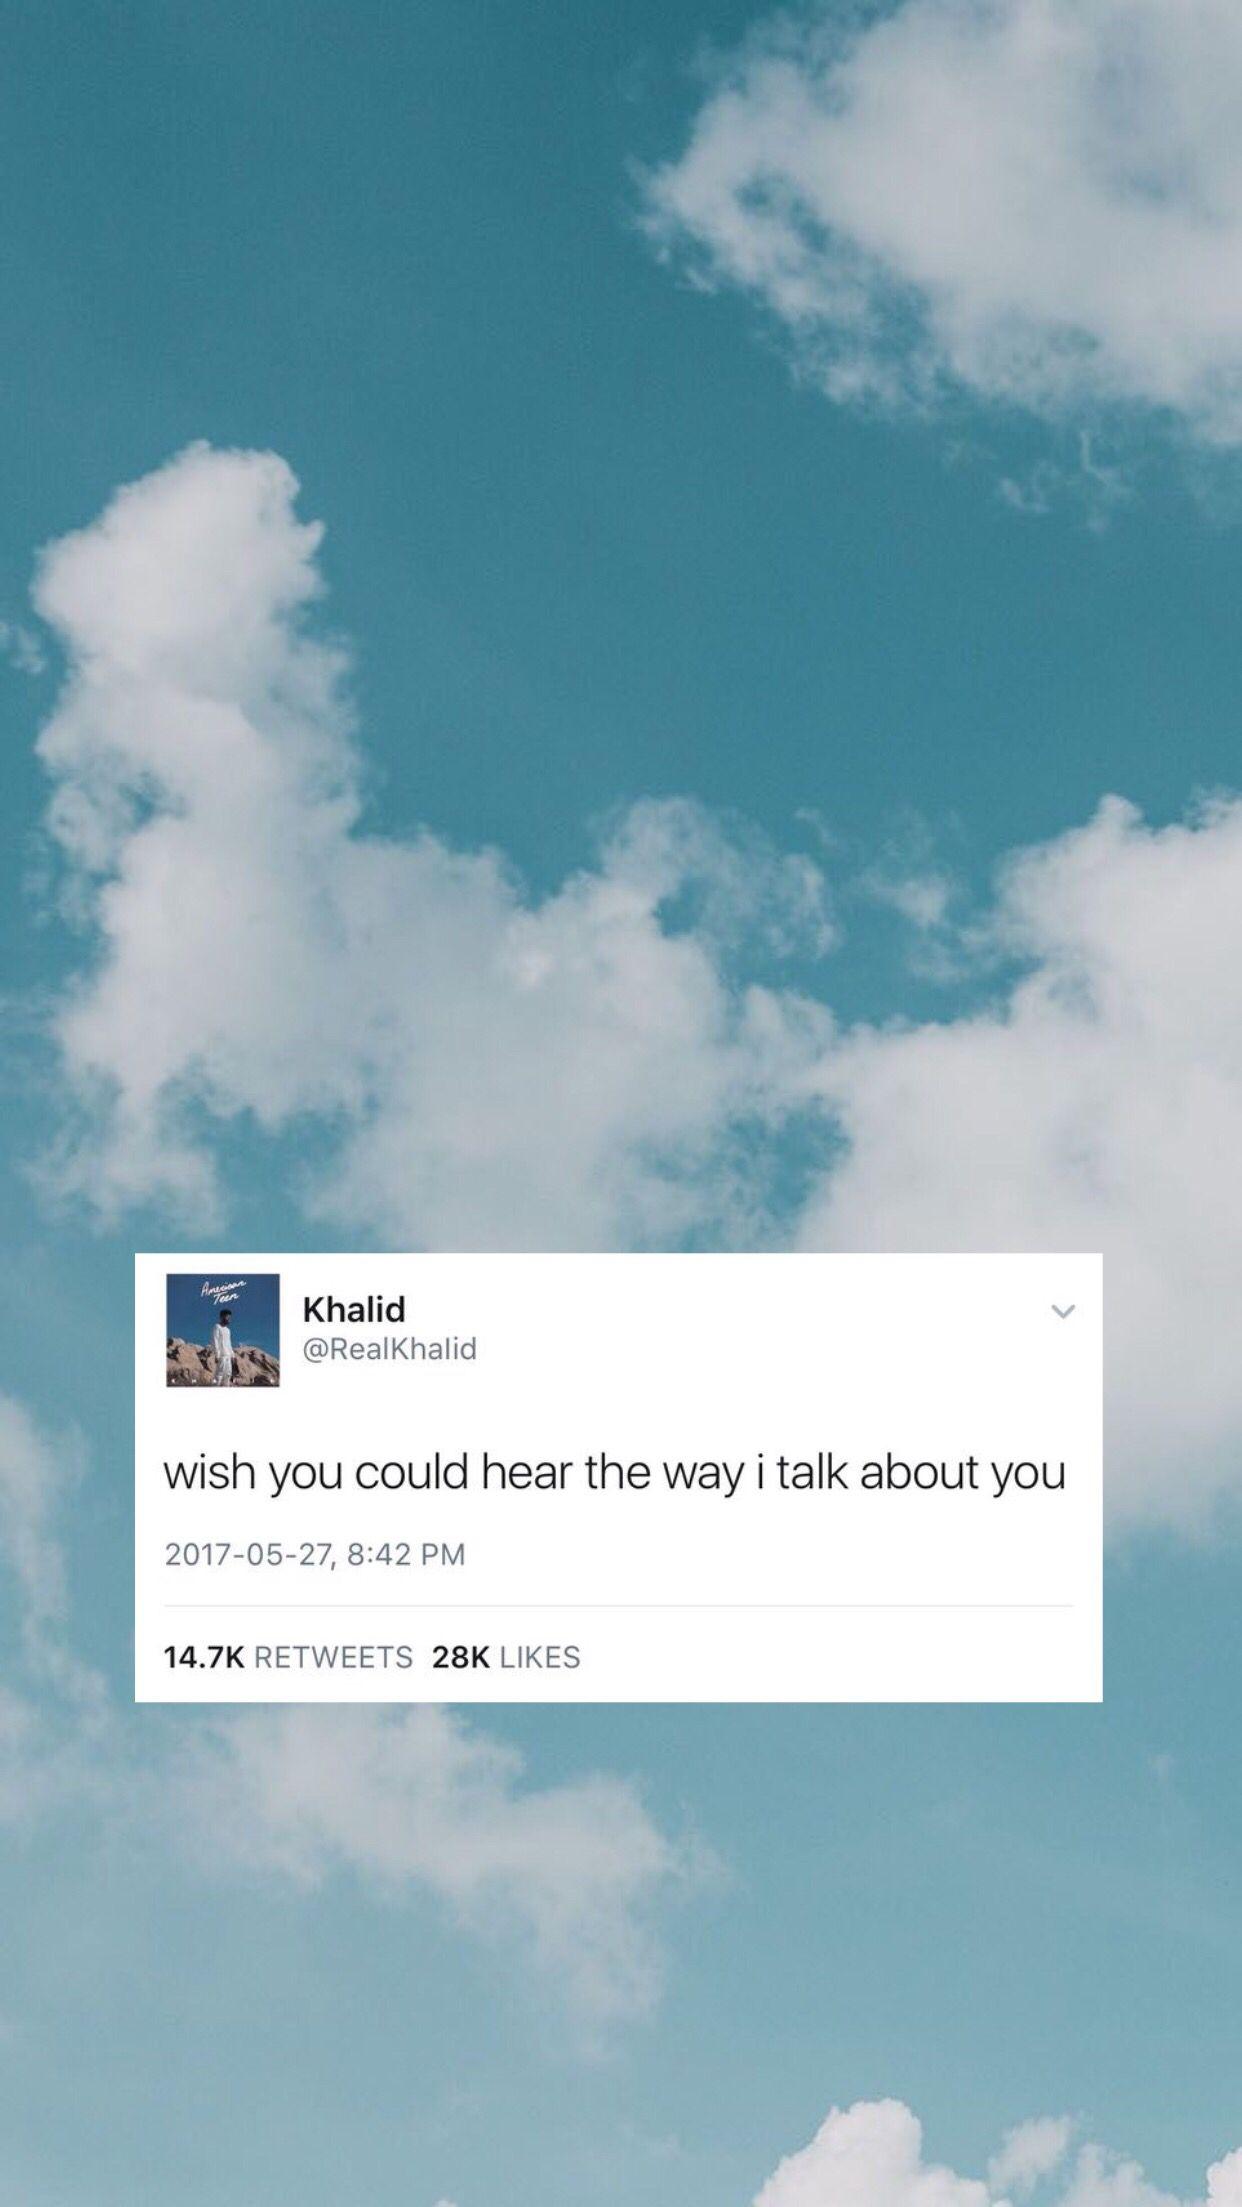 sweet, aesthetic wallpaper with khalid tweet. hope you like it. i made it using picsart